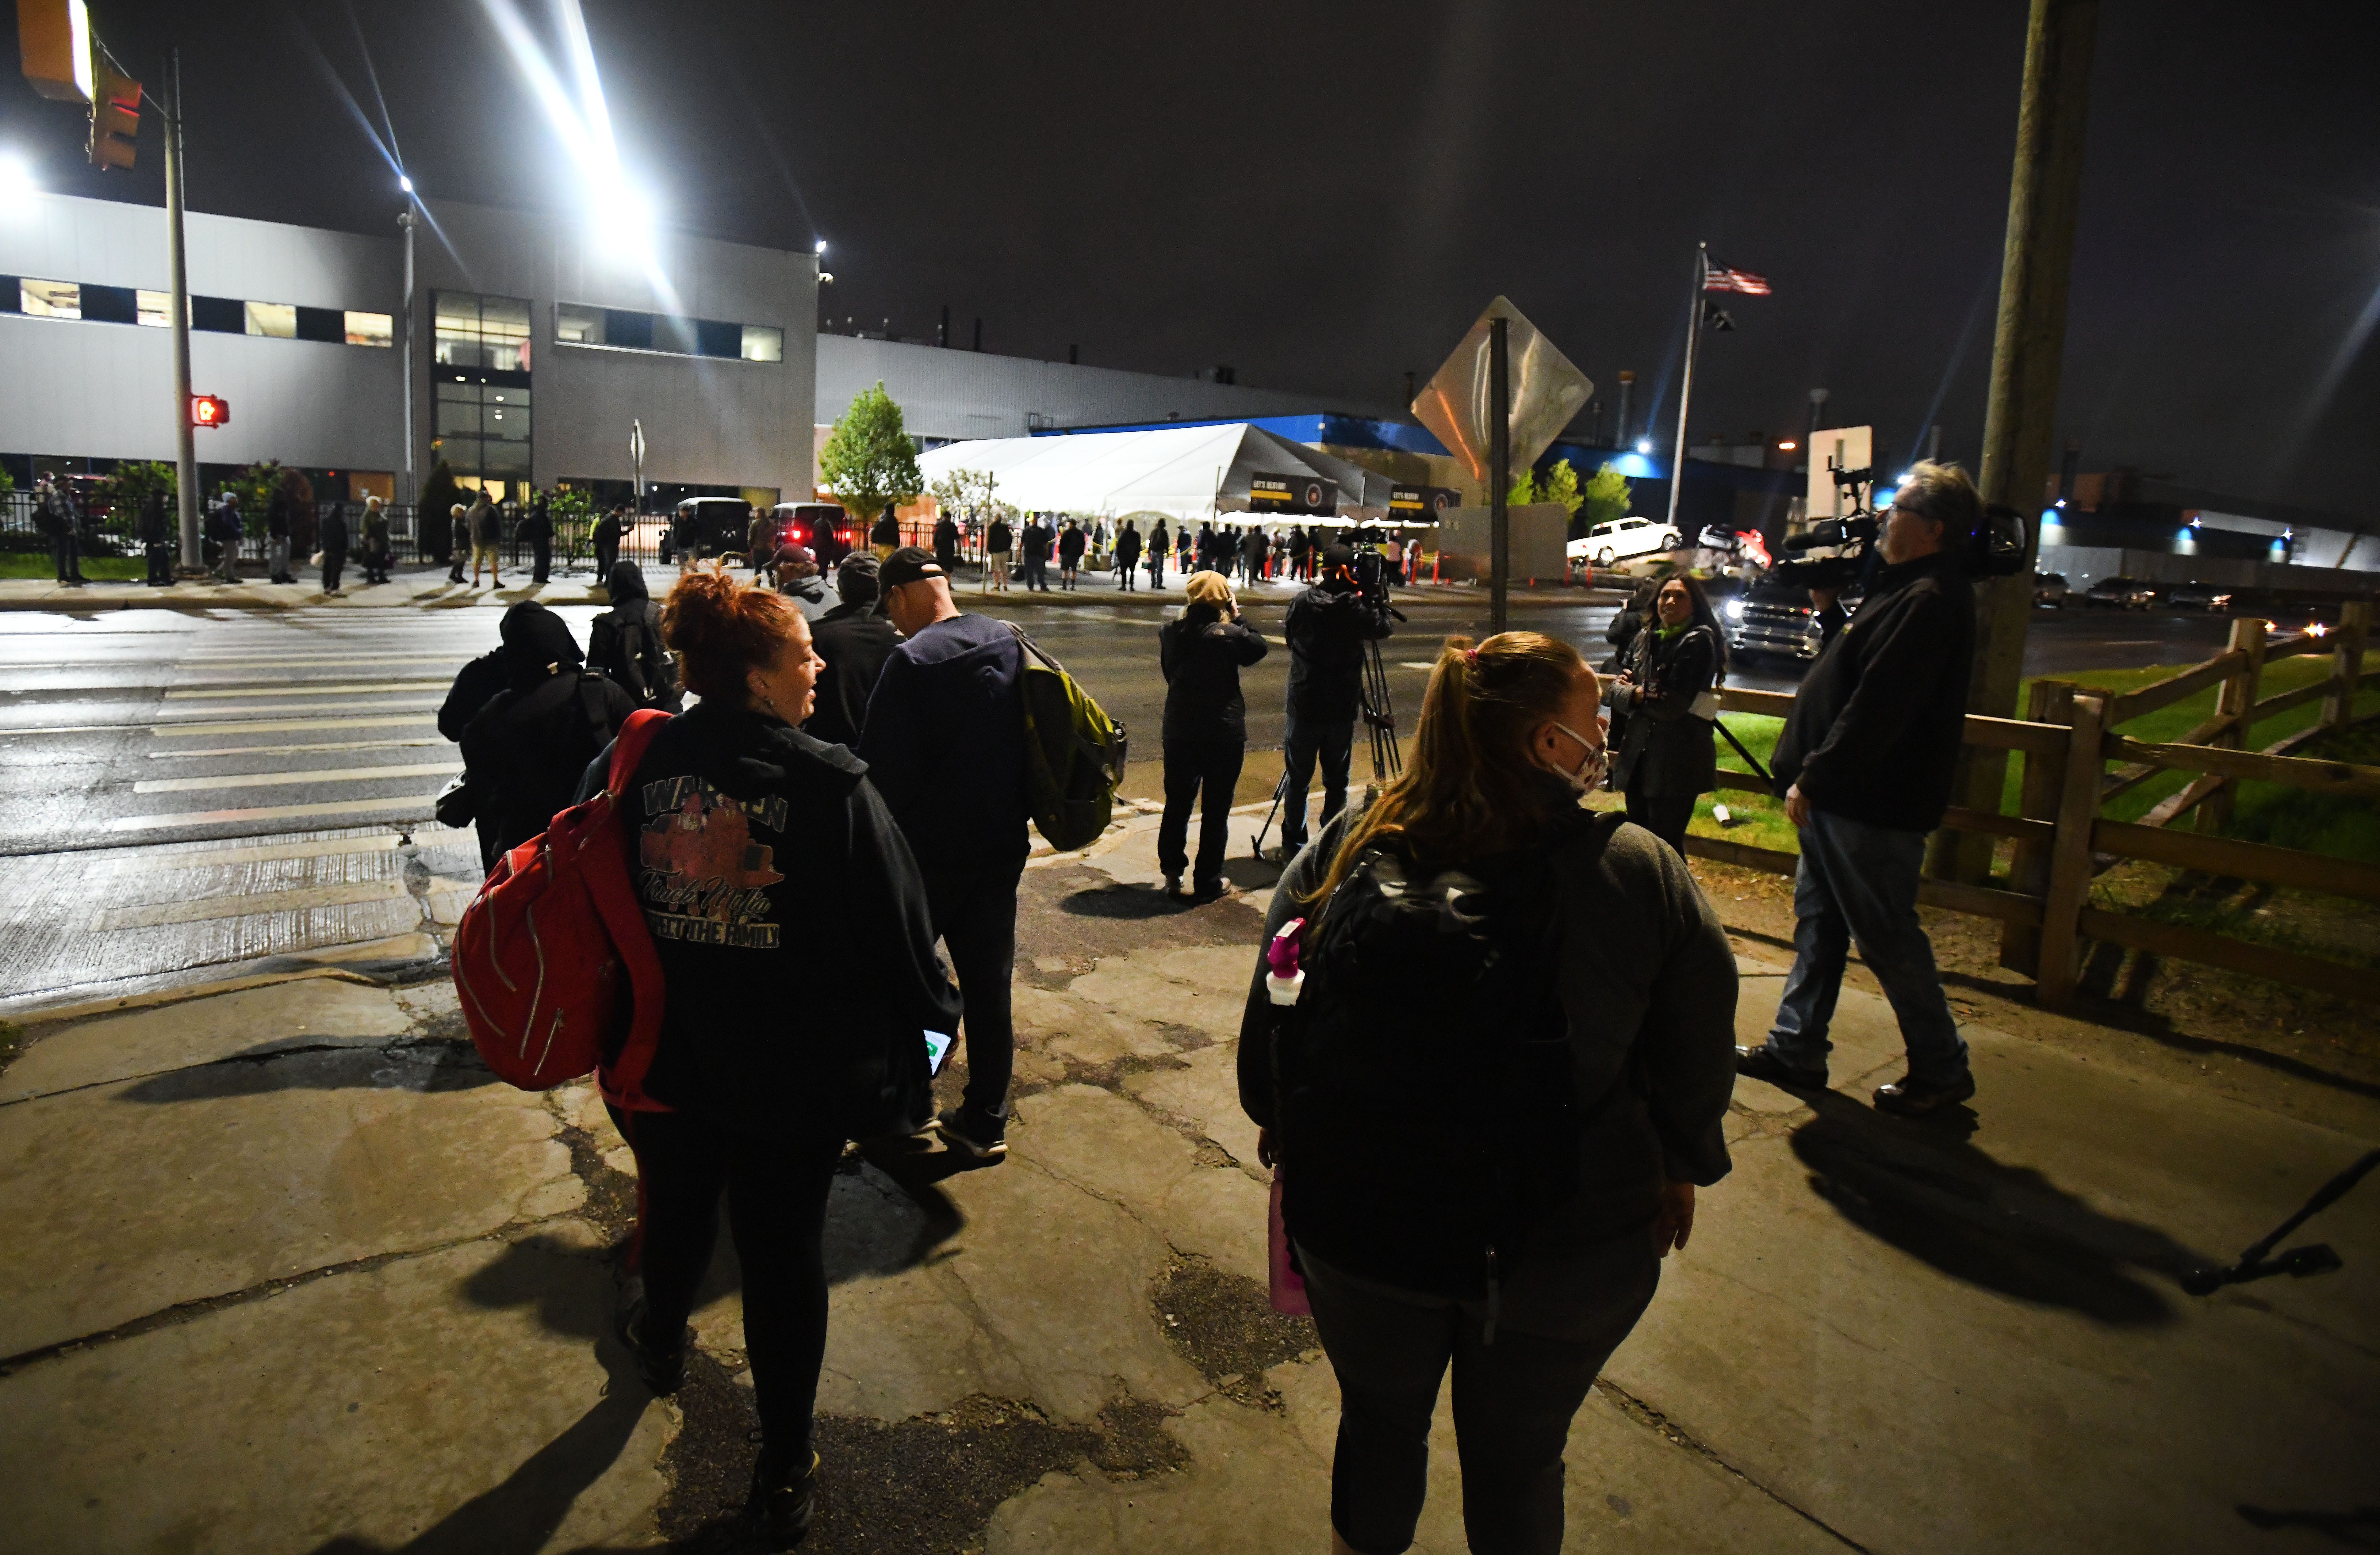 Employees wait in line at 4 am as they arrive at the employee entrance at FCA Warren Truck Assembly in Warren, Michigan on May 18, 2020.